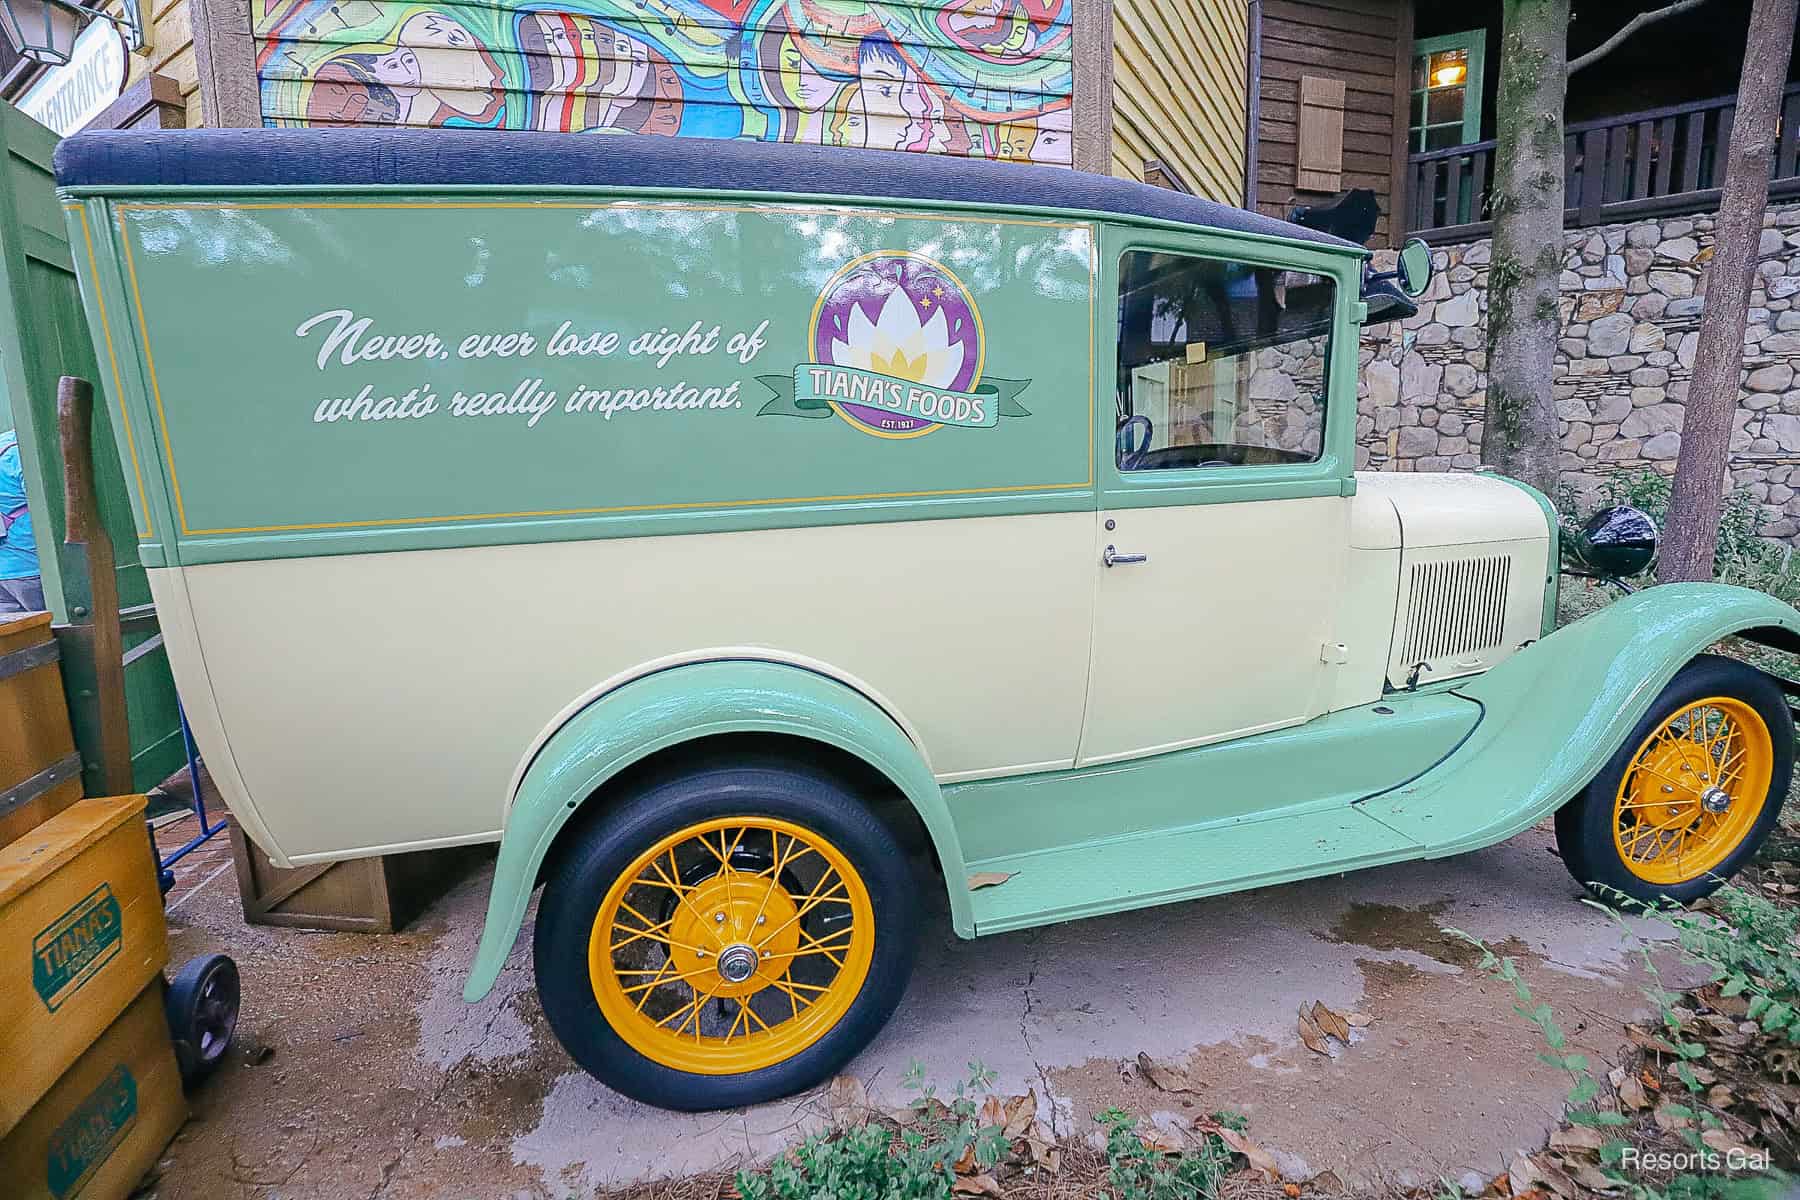 an antique vehicle in the queue of Tiana's Bayou Adventure that says Tiana's Foods and "Never, ever lose sight of what's really important." 